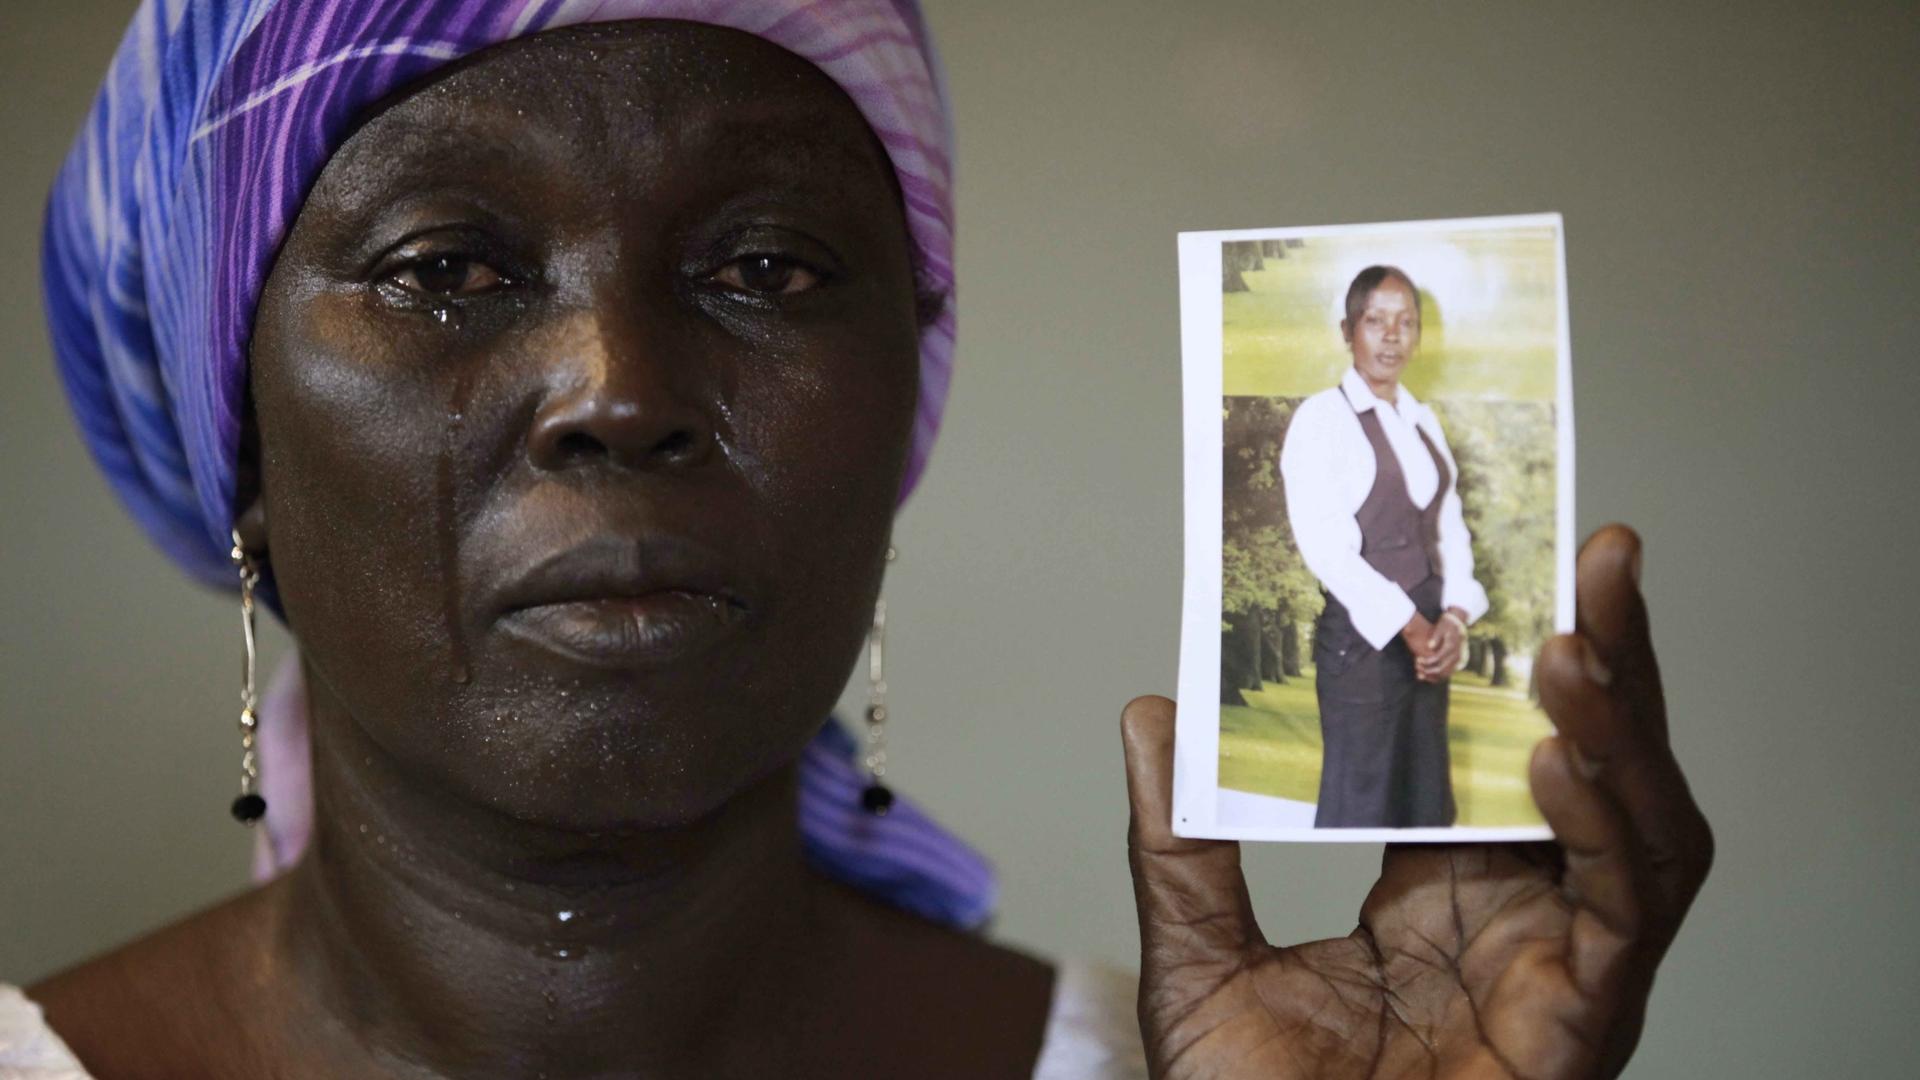 Martha Mark, the mother of kidnapped schoolgirl Monica Mark holds her daughter's photo, in the family house, in Chibok, Nigeria in May 2014. A schoolmate says Mark cried with joy when she saw a Boko Haram video appearing showing some of the kidnapped girl